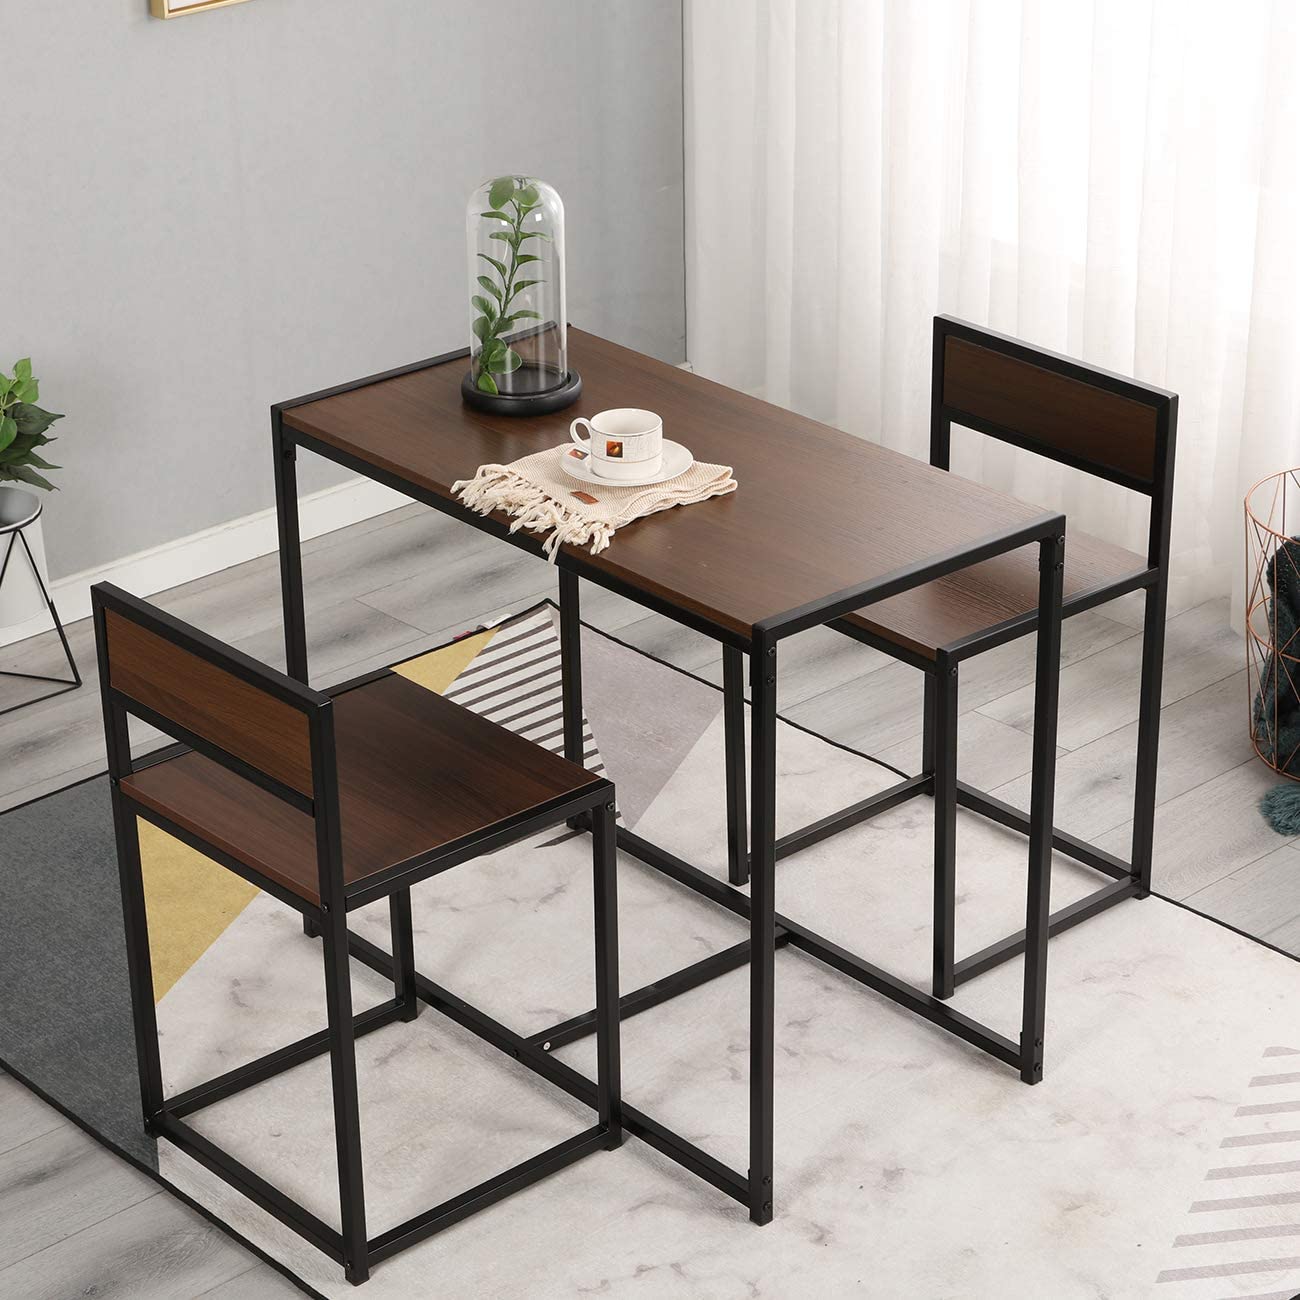 SogesPower Home 30in 3-Piece Dining Table Set with 2 Chairs Modern Table- Brown